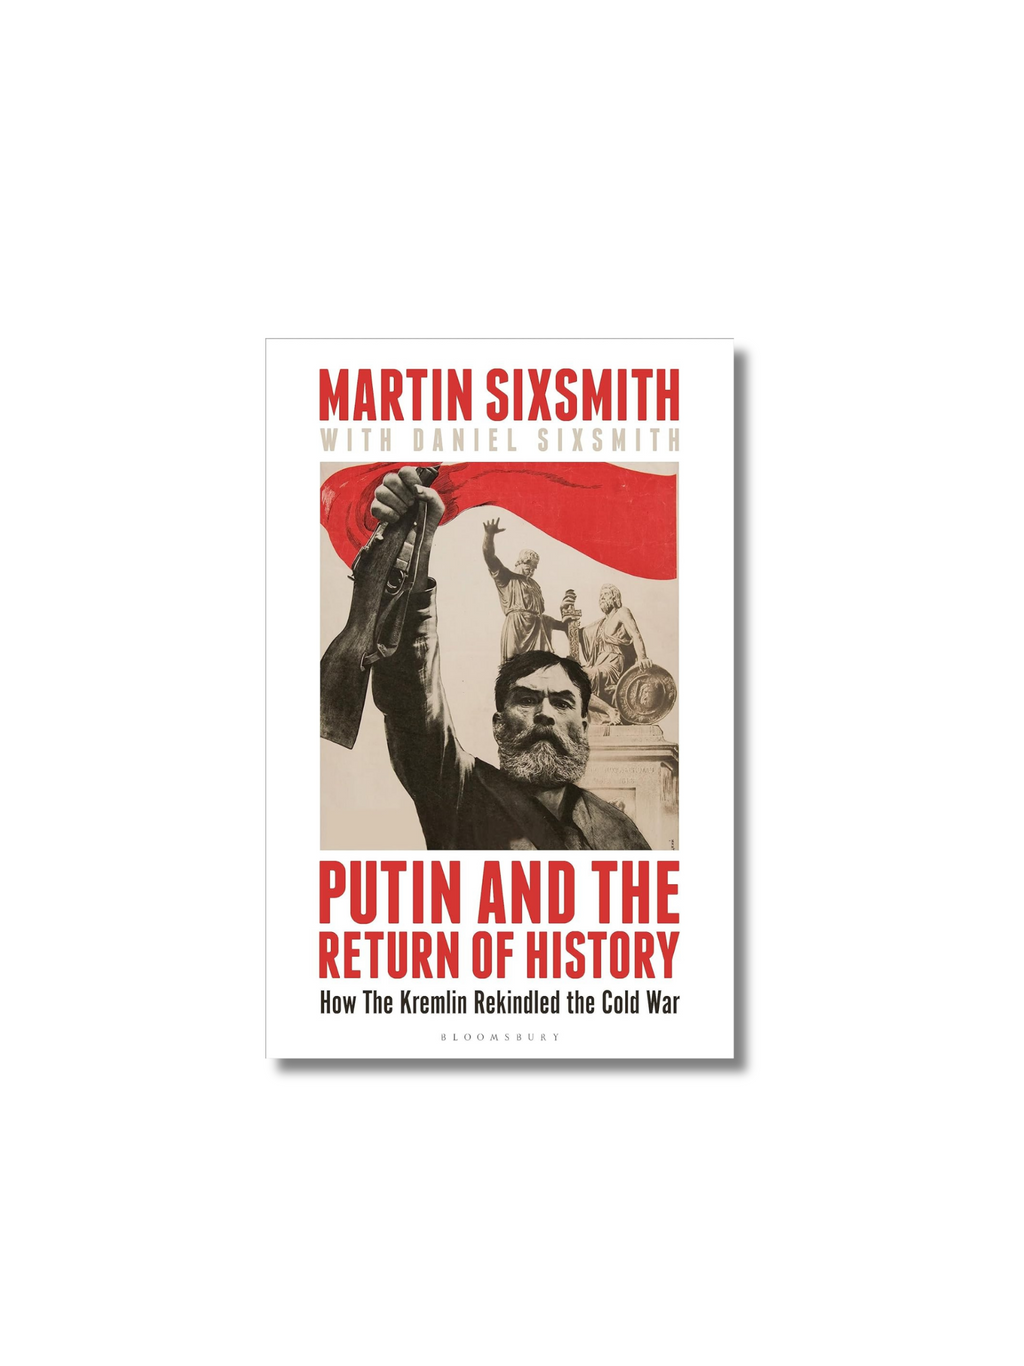 Putin and the Return of History: How the Kremlin Rekindled the Cold War